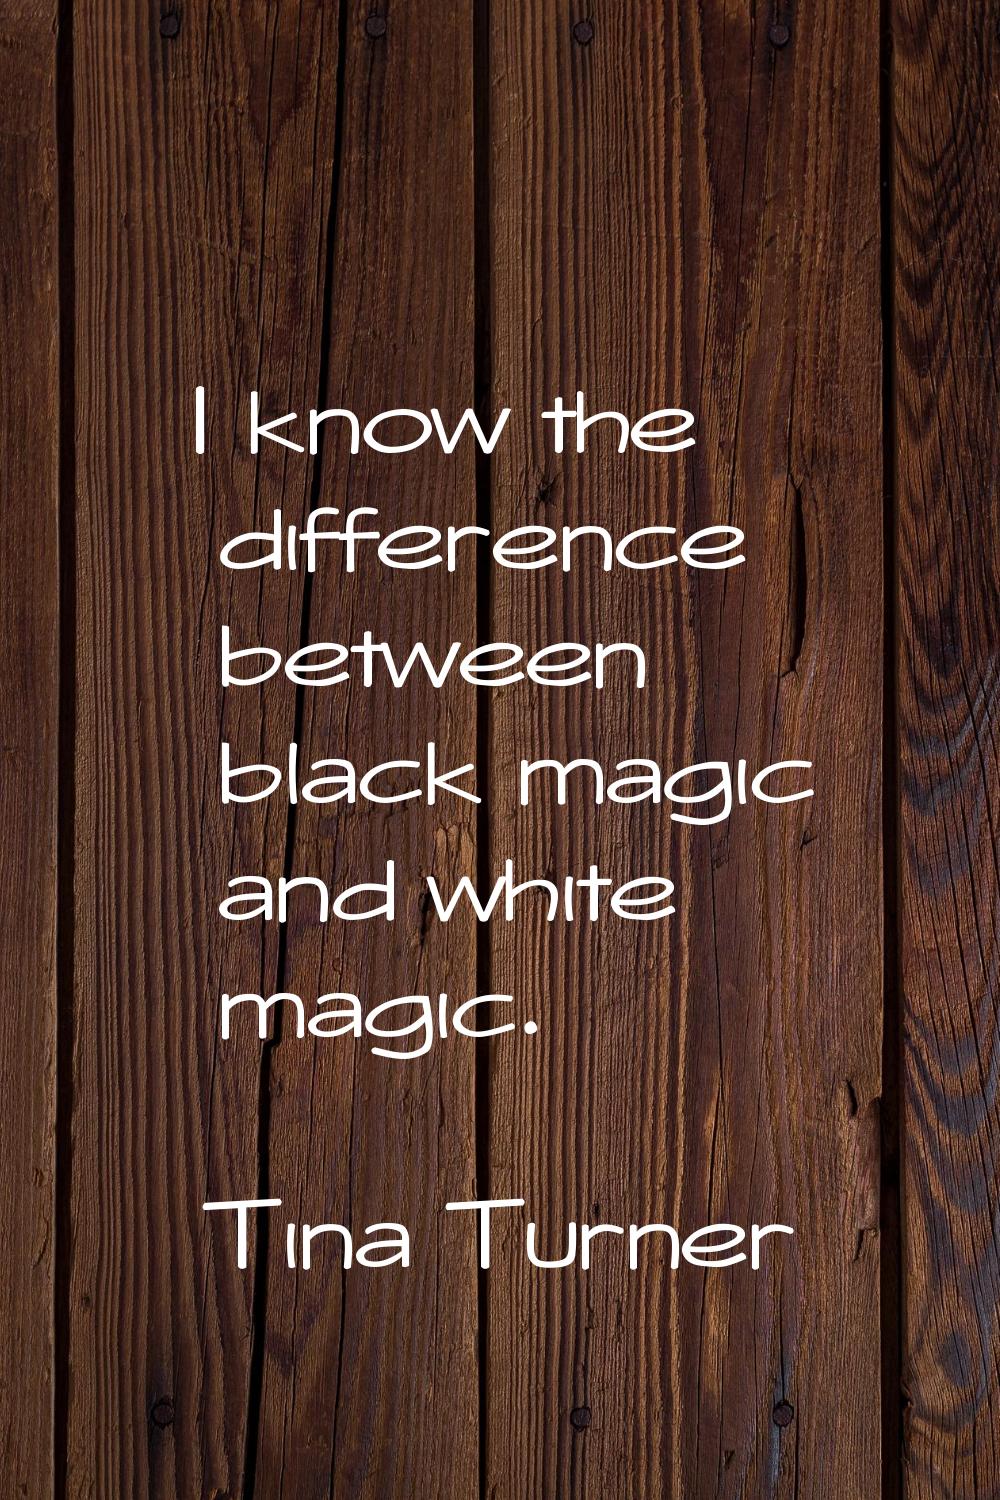 I know the difference between black magic and white magic.